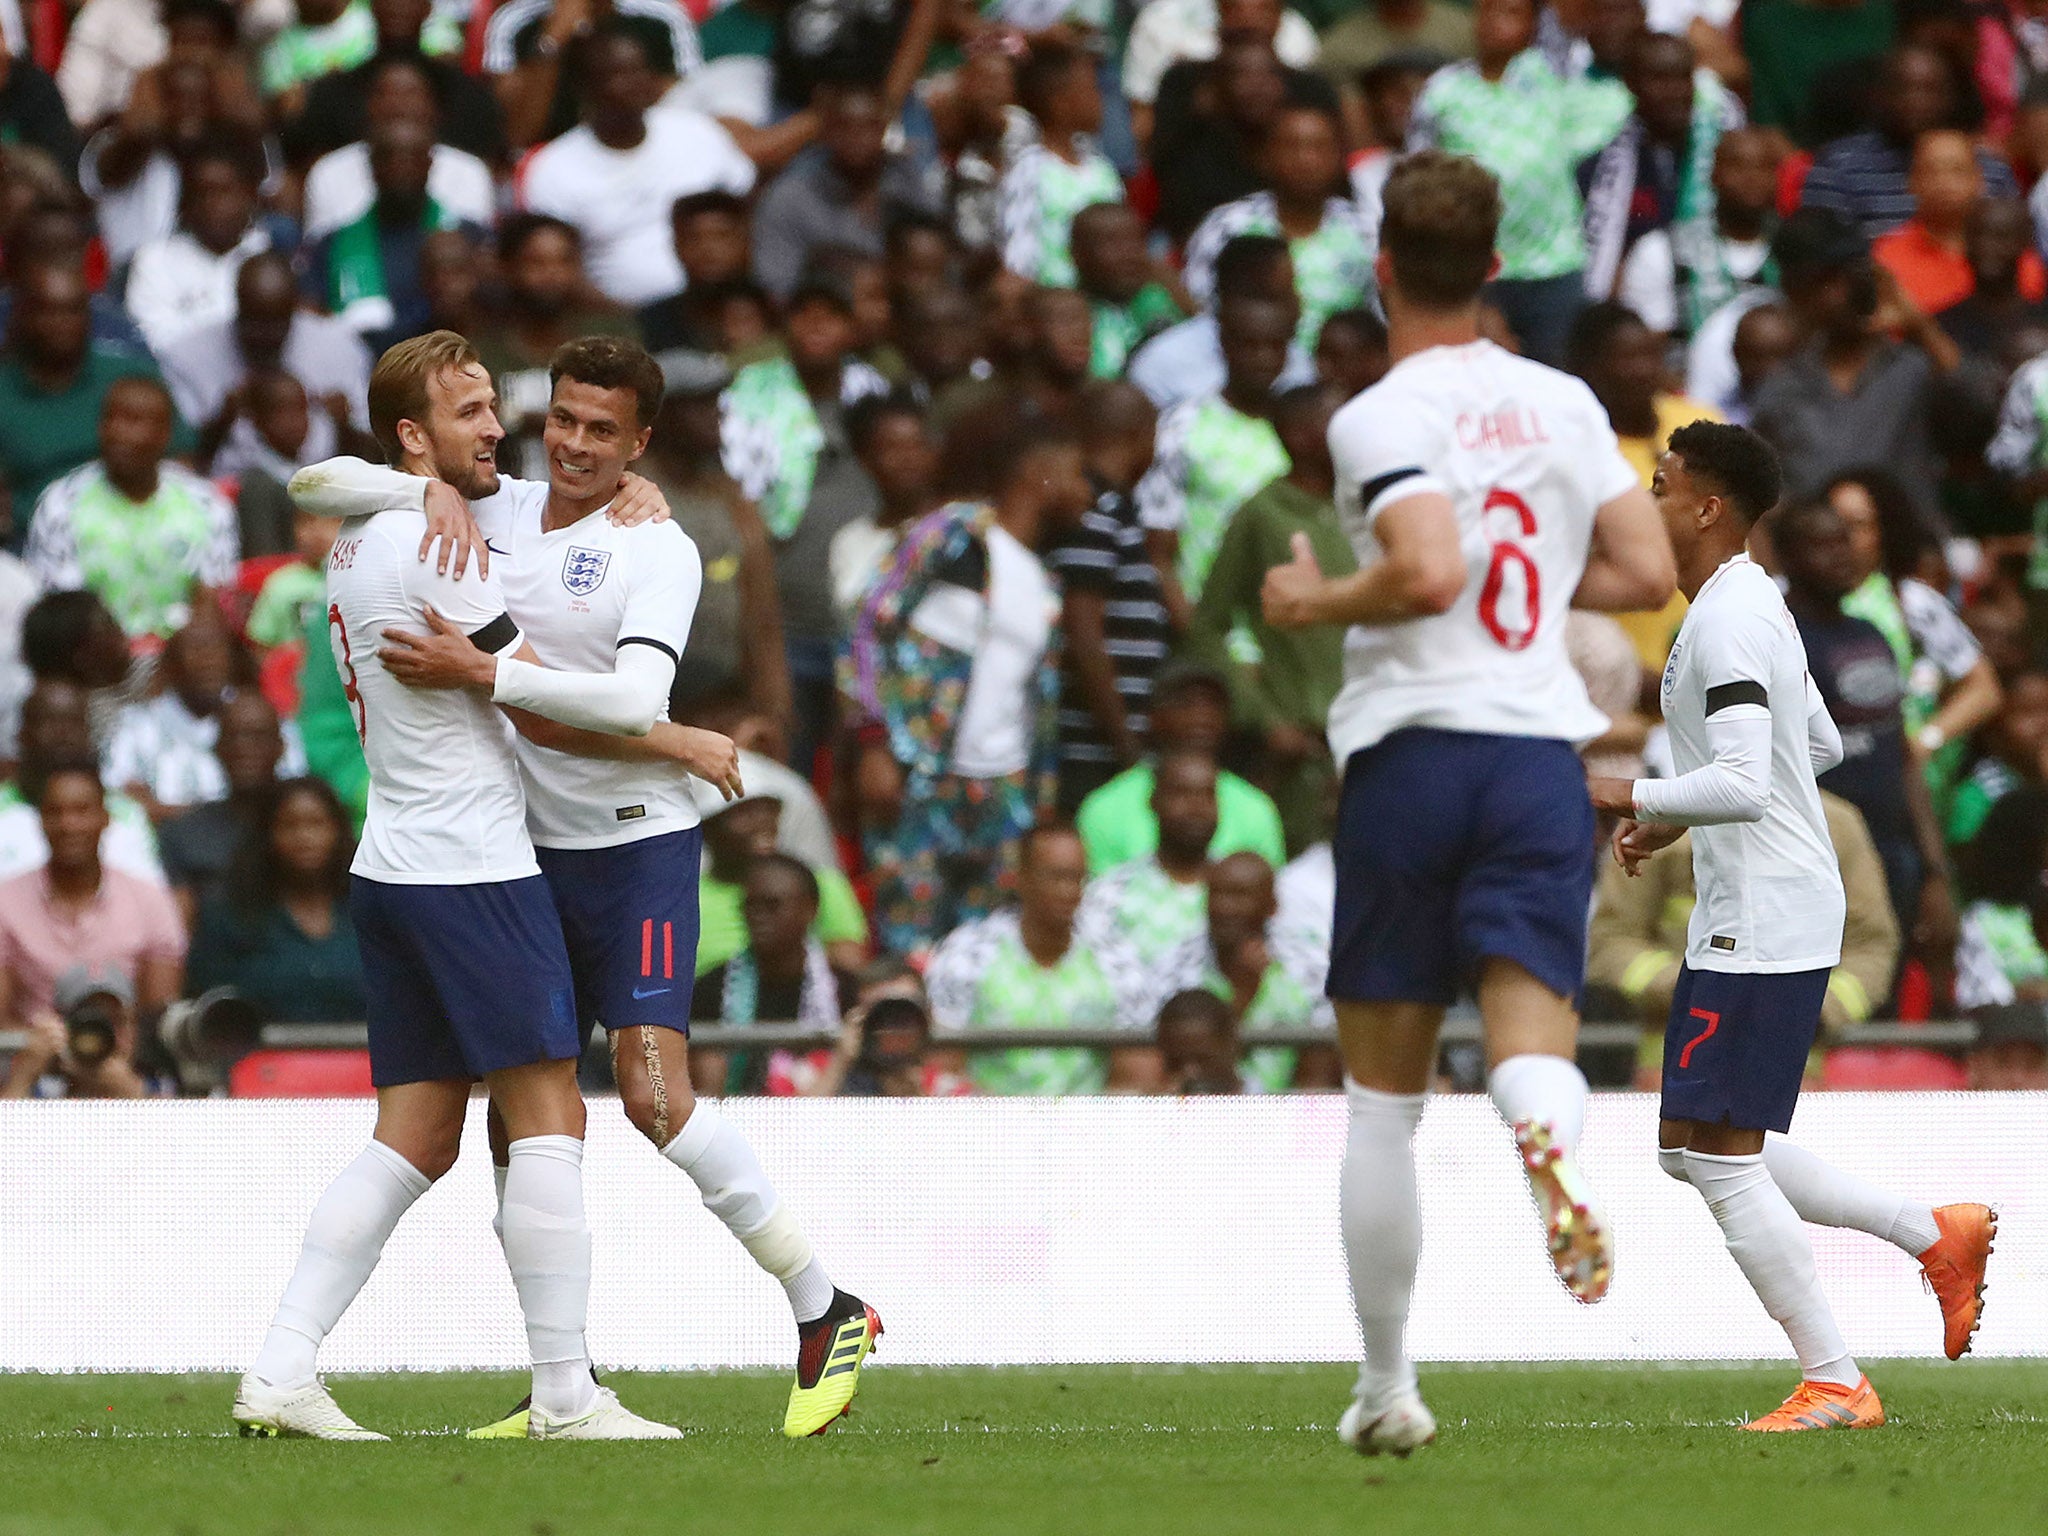 Ten per cent of those polled thought Harry Kane and his team would reach the semi-finals in this summer’s competition